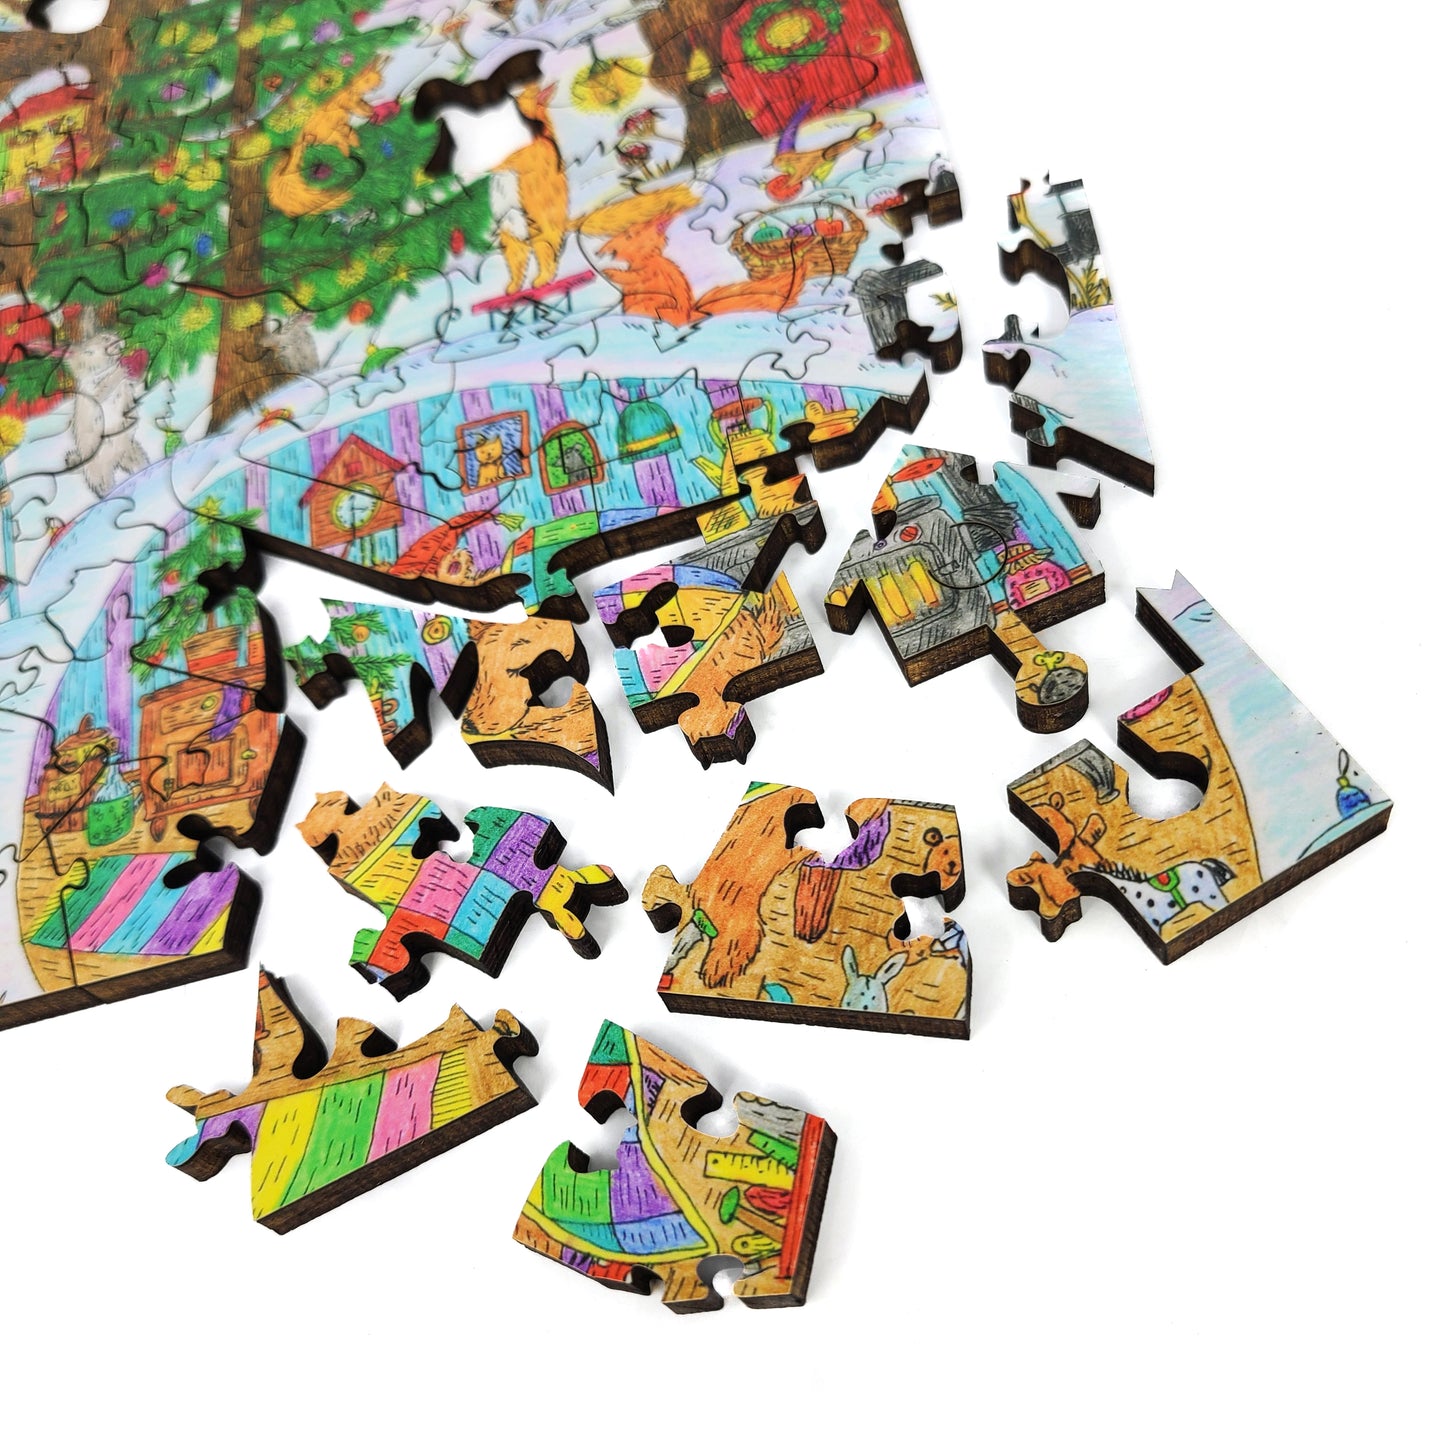 Wooden Jigsaw Puzzle with Uniquely Shaped Pieces for Adults - 245 Pieces - Fairy Forest. Winter